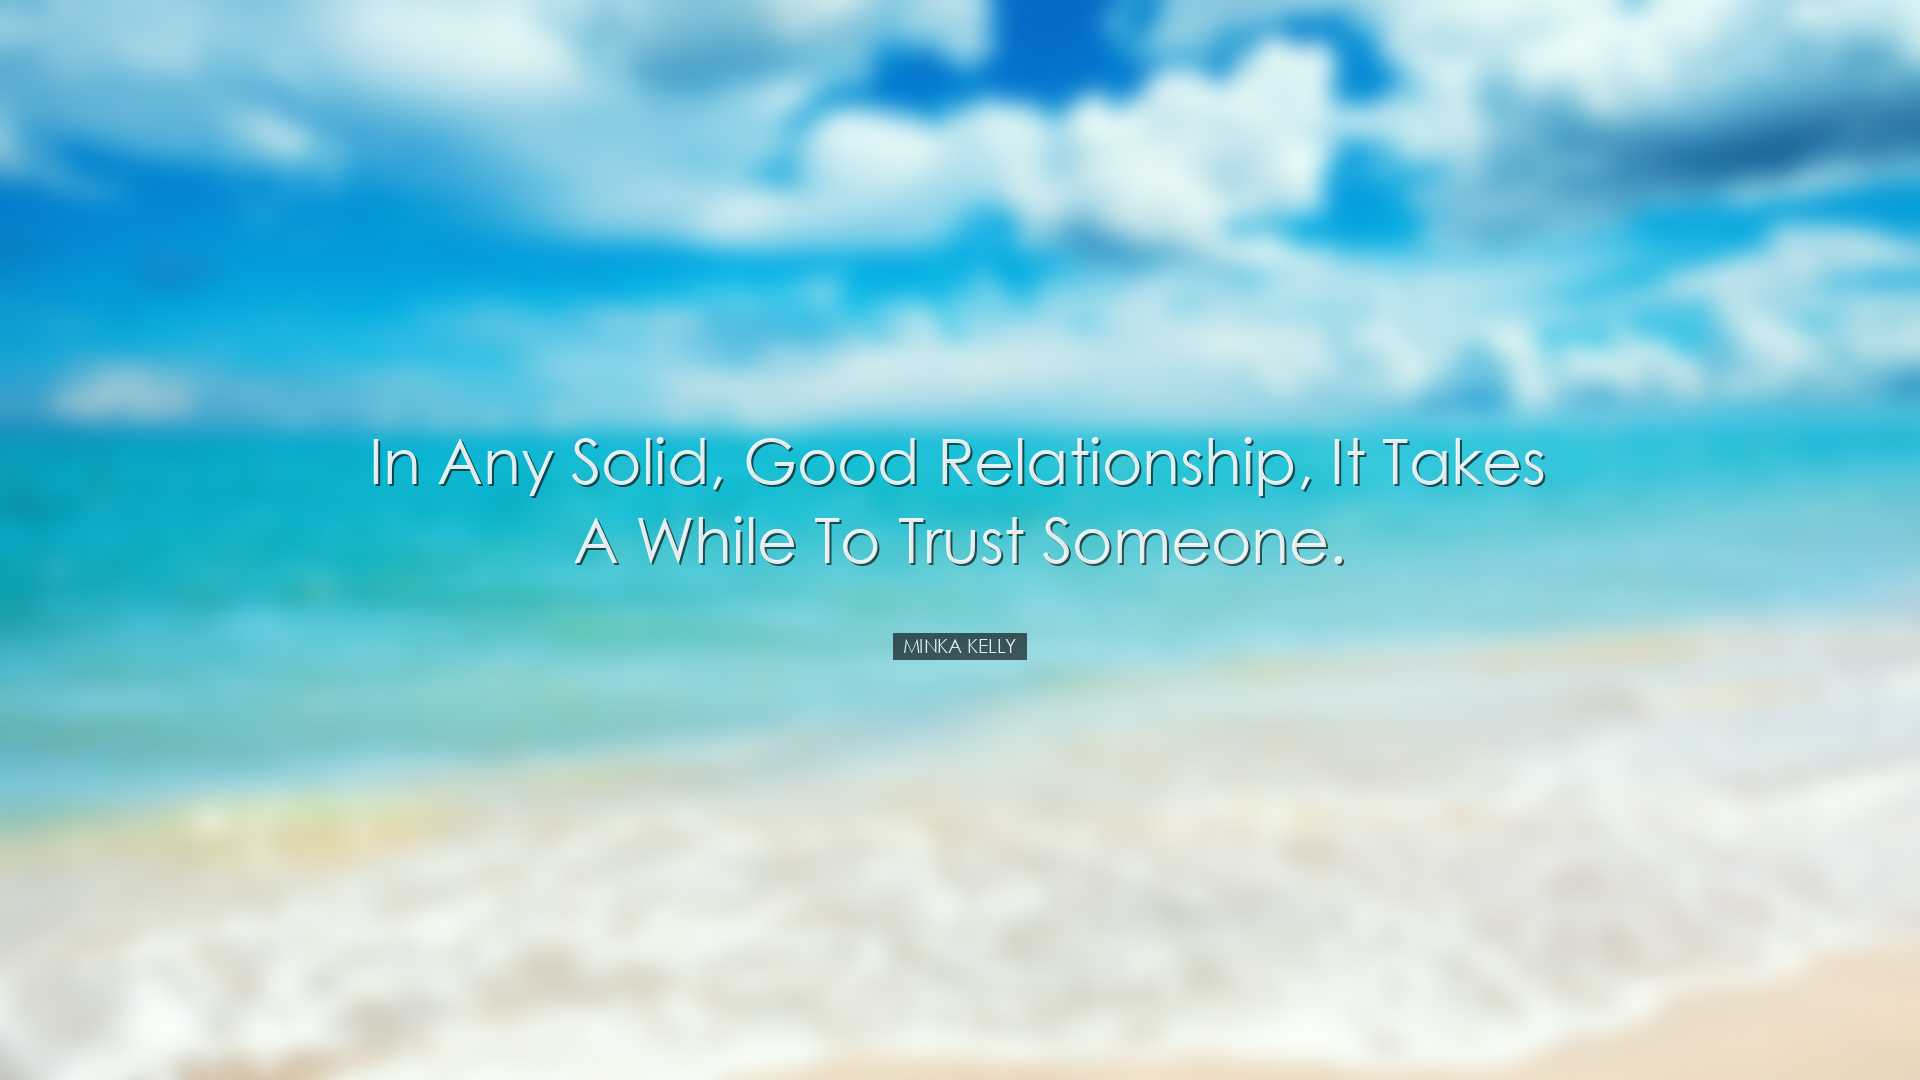 In any solid, good relationship, it takes a while to trust someone